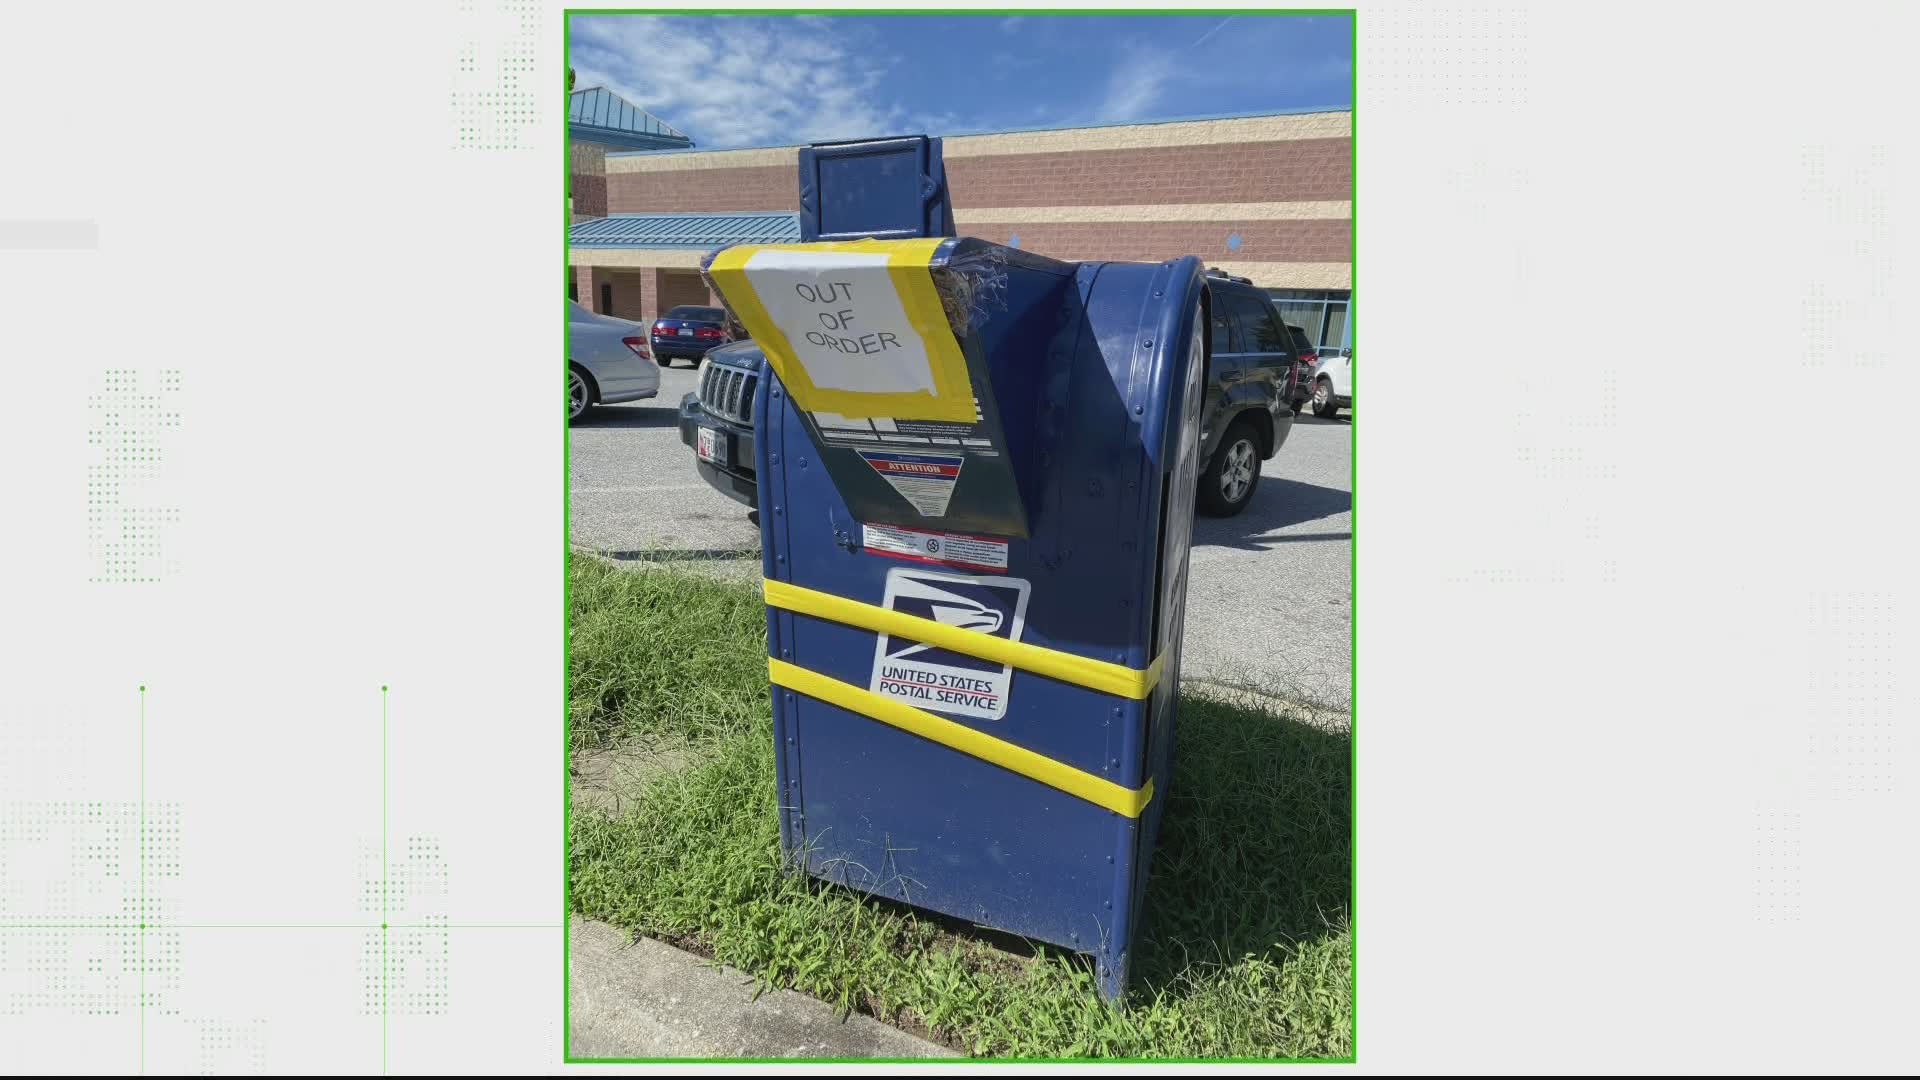 A collection box in Bowie, Maryland was temporarily marked out of order. Here's why officials are investigating it for mail theft.